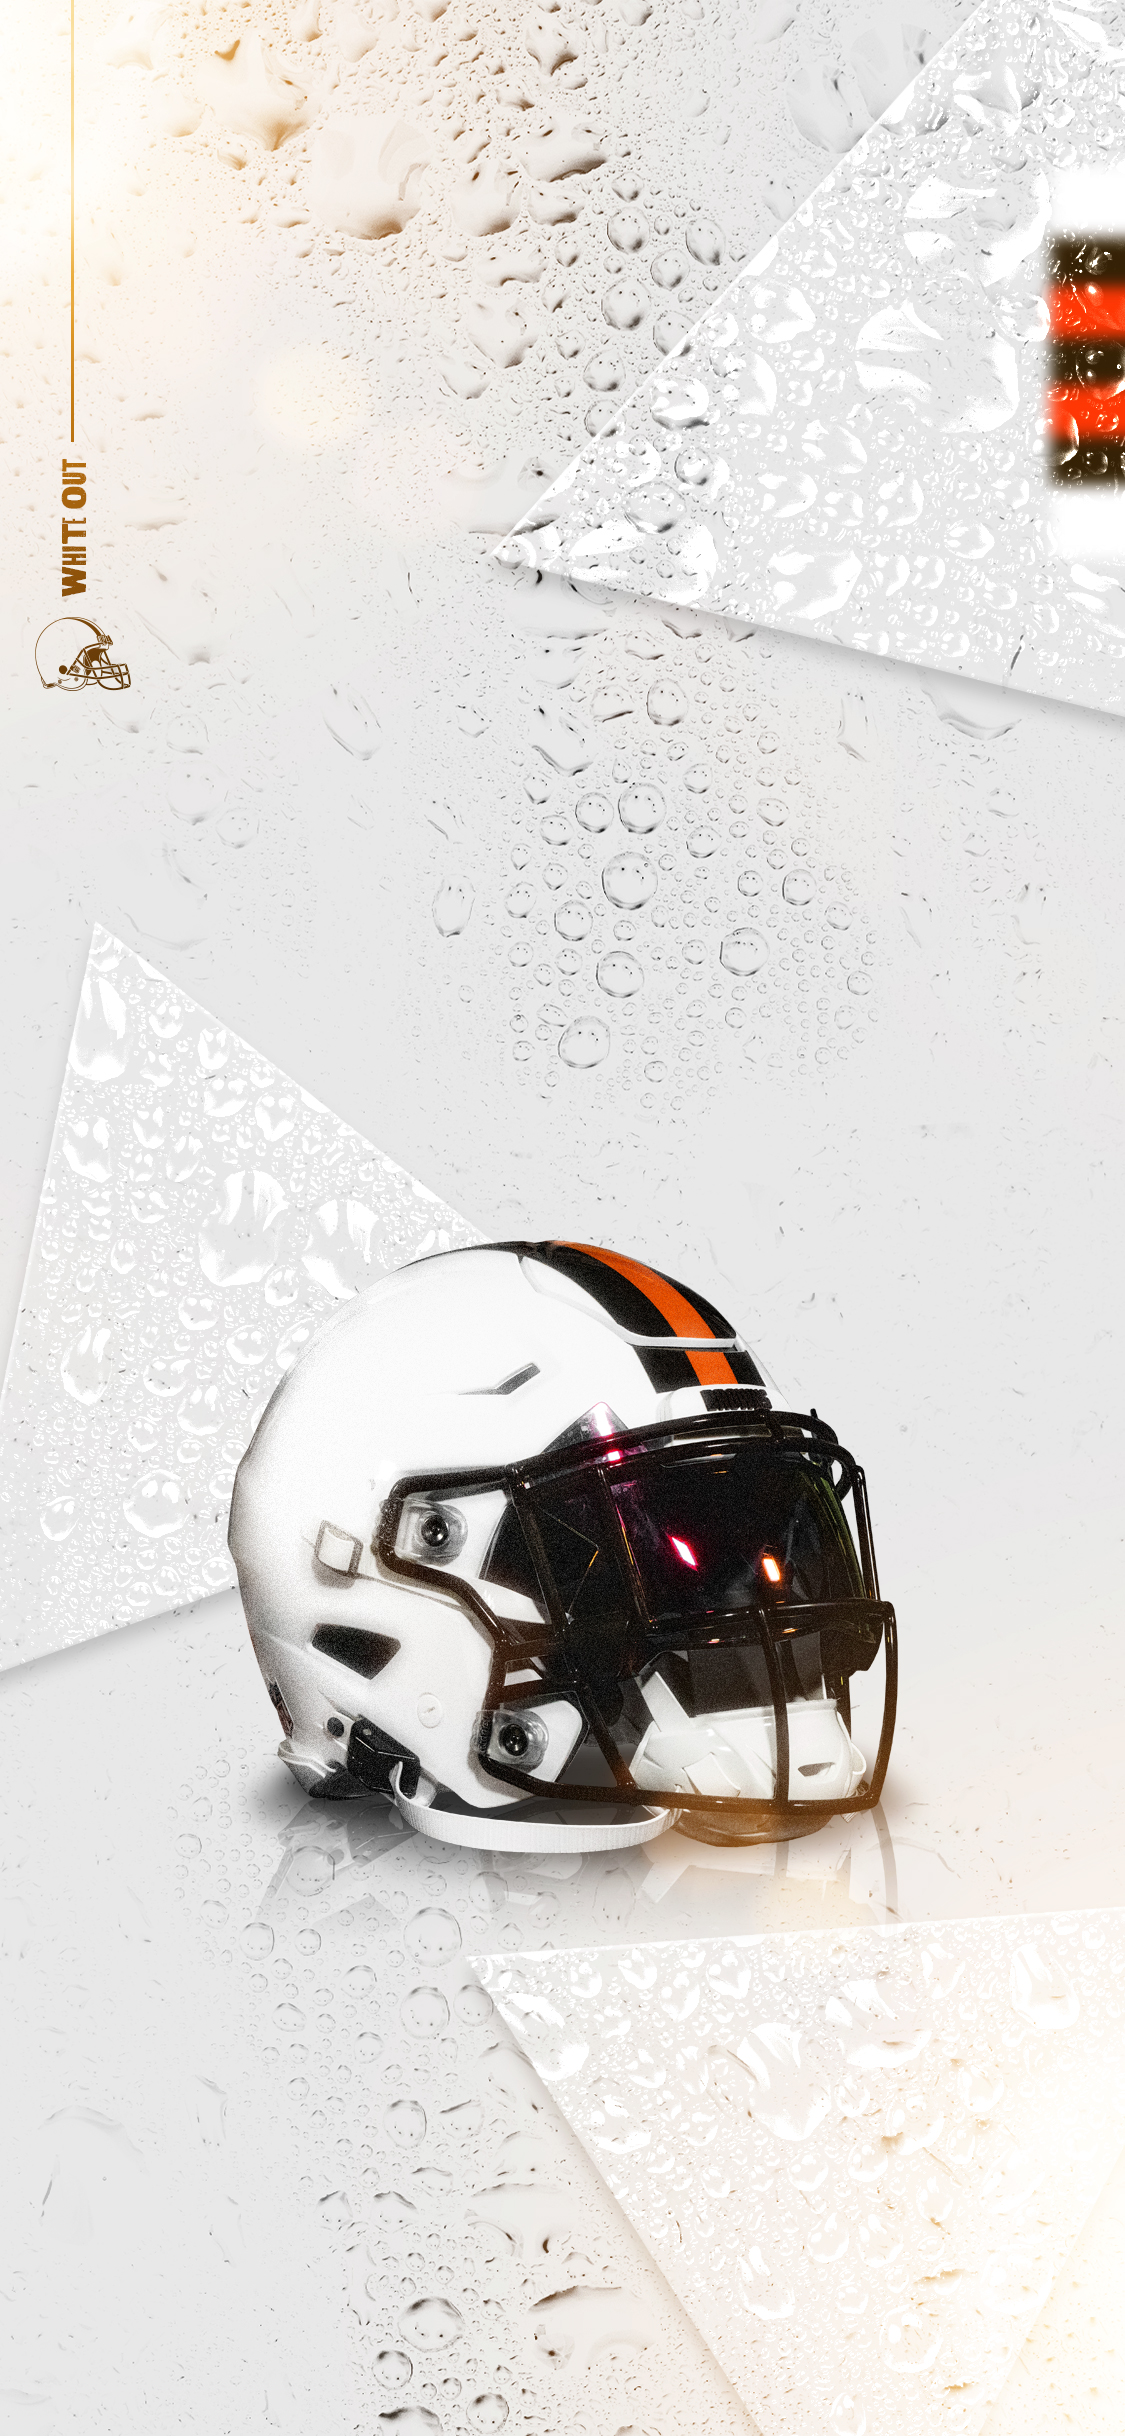 Cleveland Browns Wallpapers - Wallpaper Cave